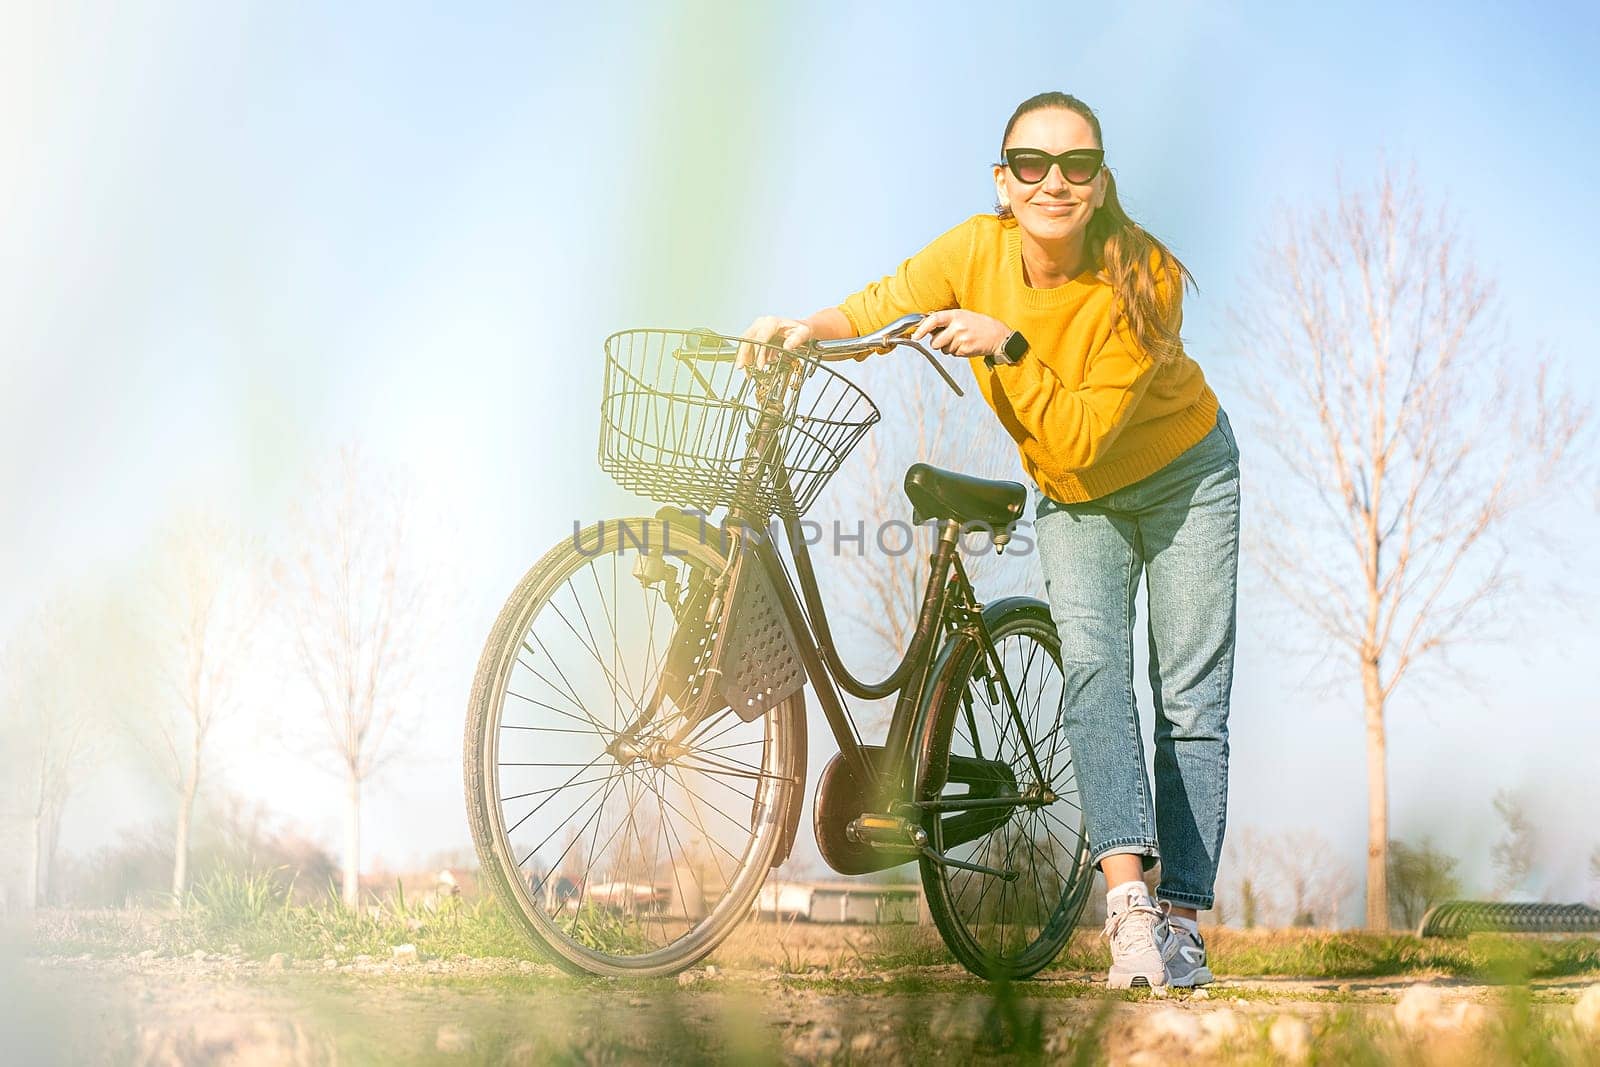 Beautiful young woman on bike in park in spring.